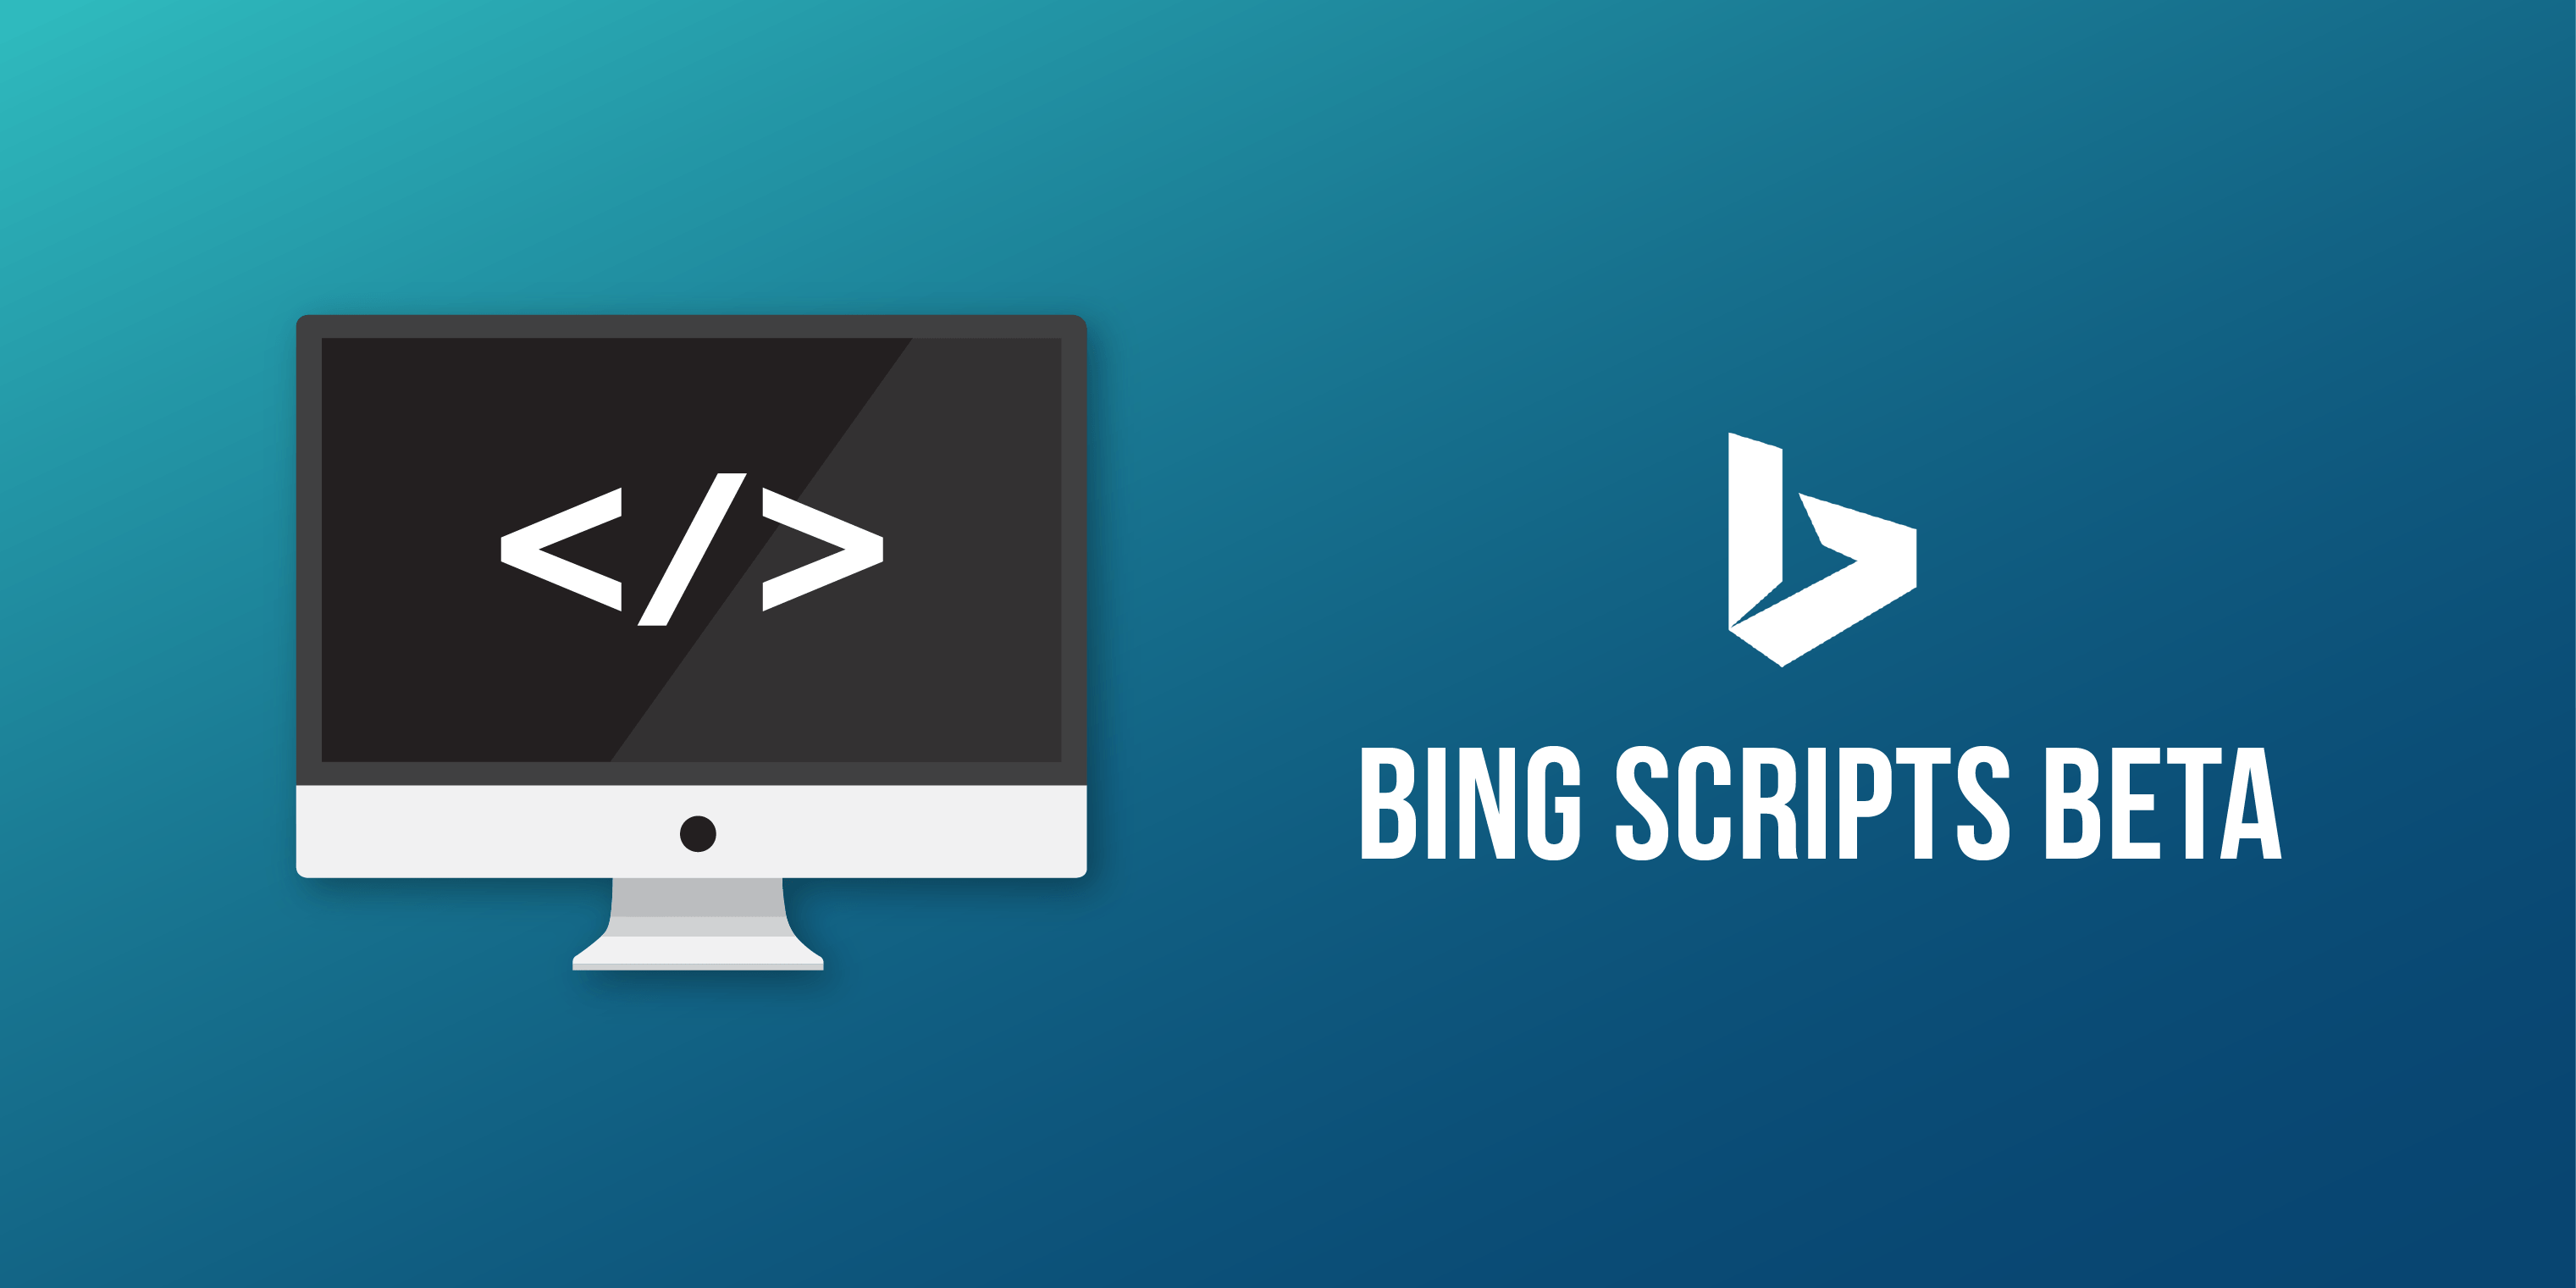 Bing First Logo - Bing Scripts Beta: How To Setup Your First Script - Take Some Risk Inc.